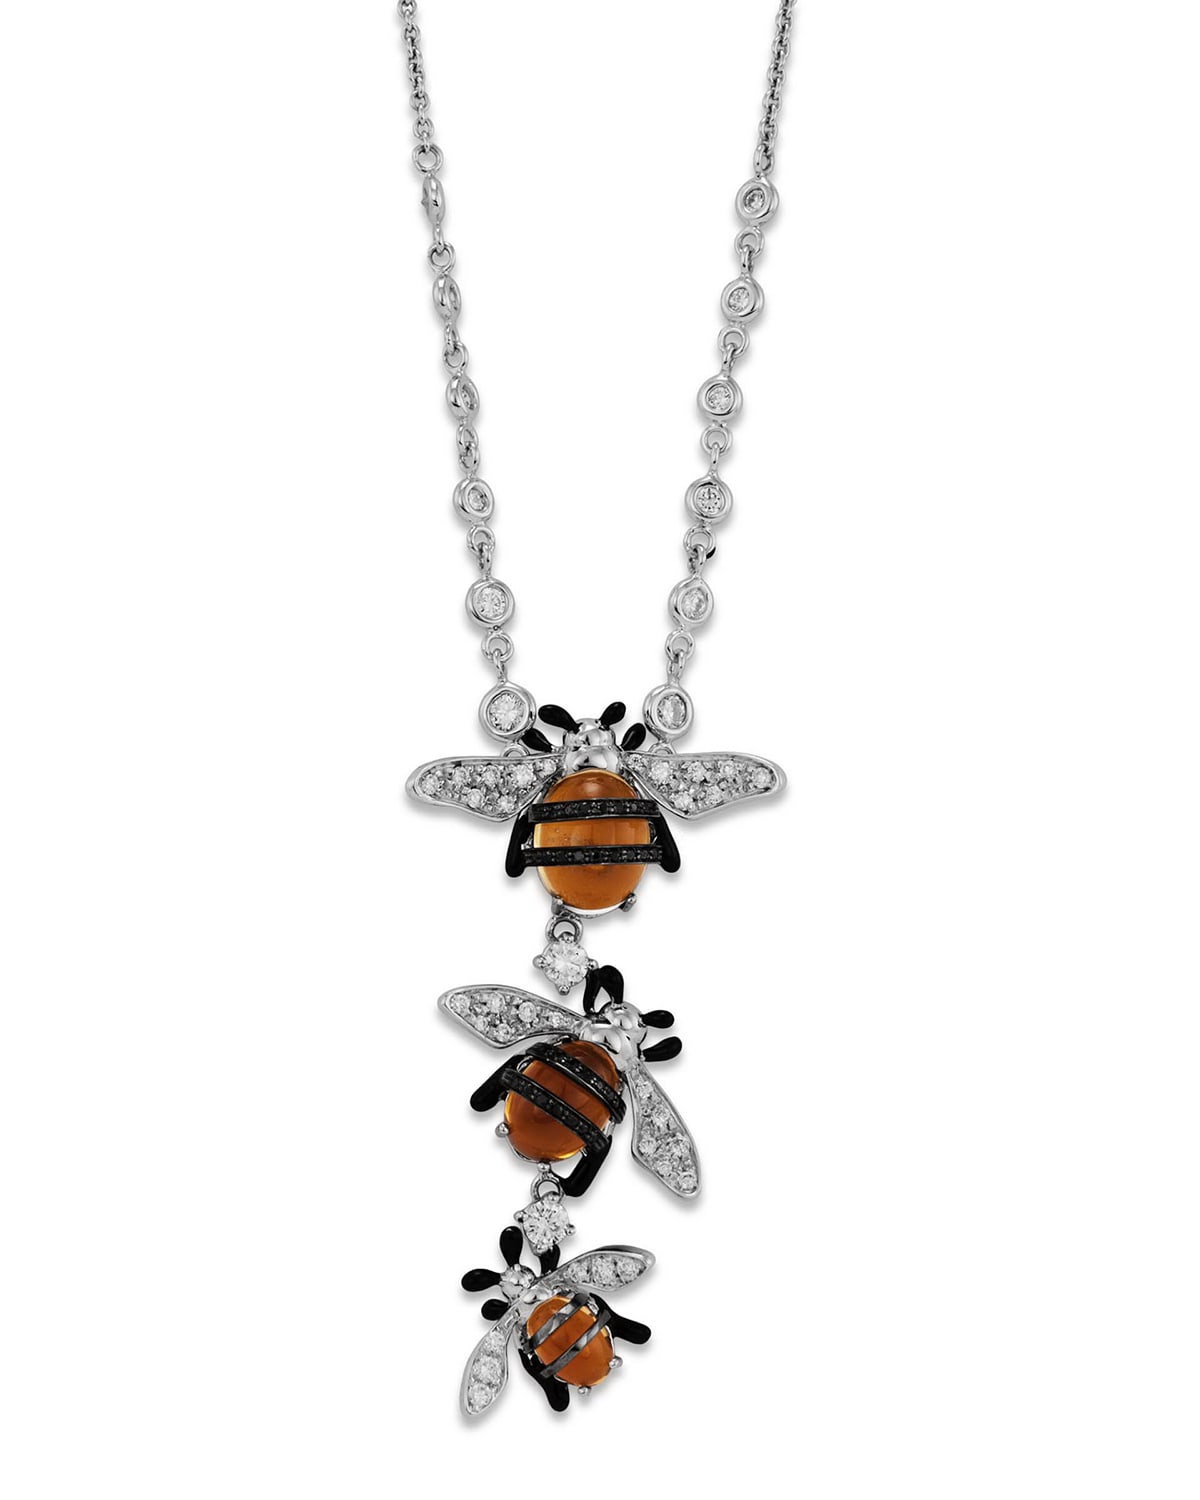 Bumble Bee Pendant Necklace with Citrine and Diamonds